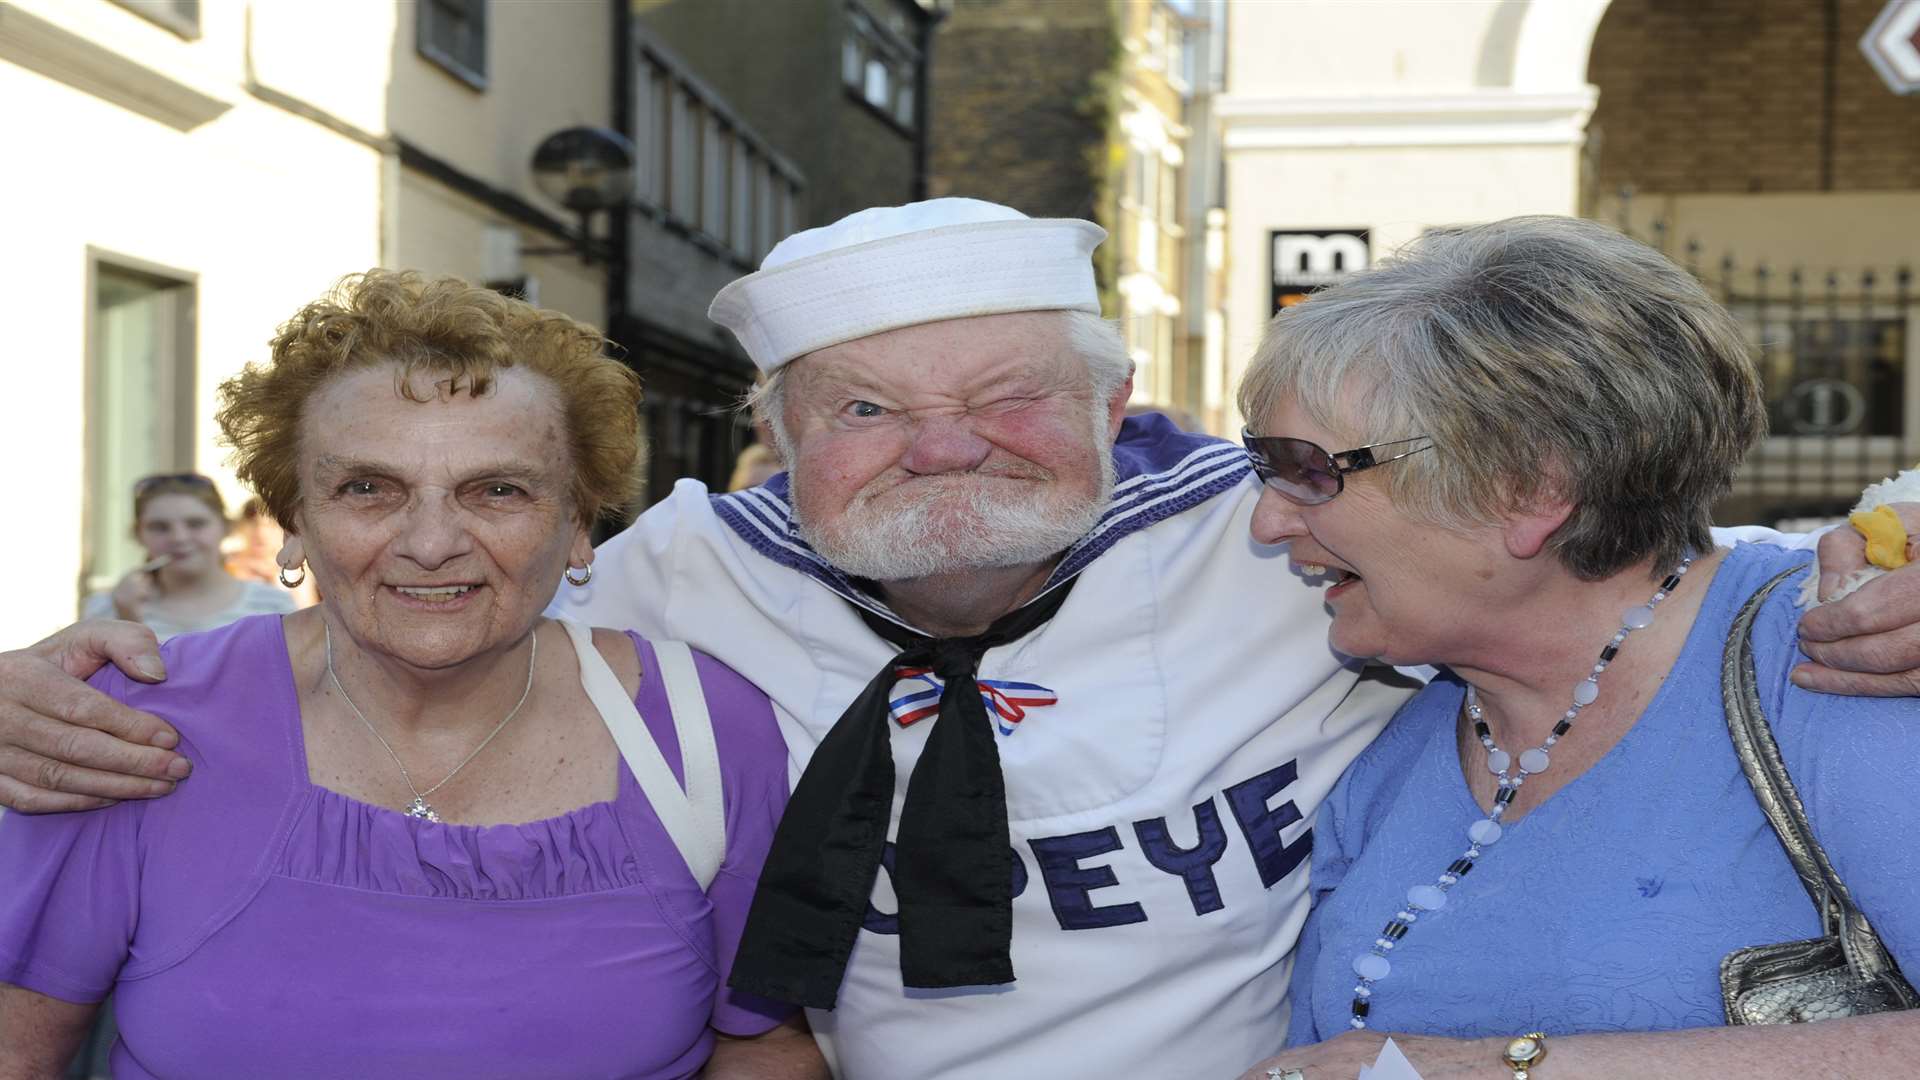 Popeye poses with Gerti and Val at Dover Carnival in 2013